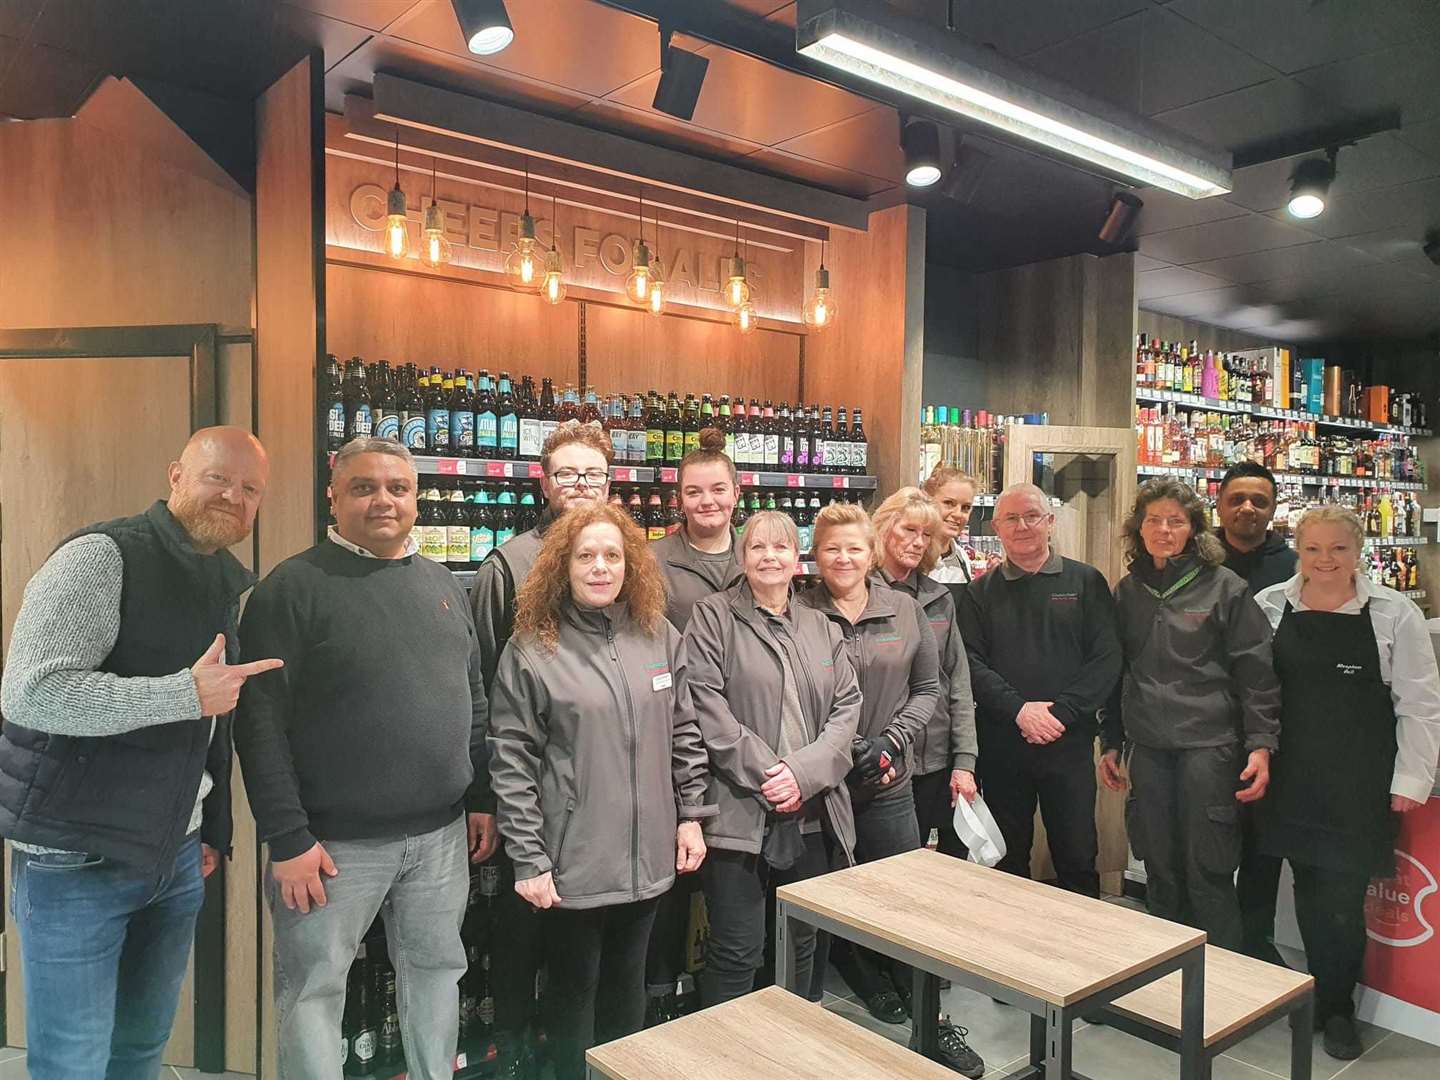 Jake Wood with the store's owner Peter Patel and staff